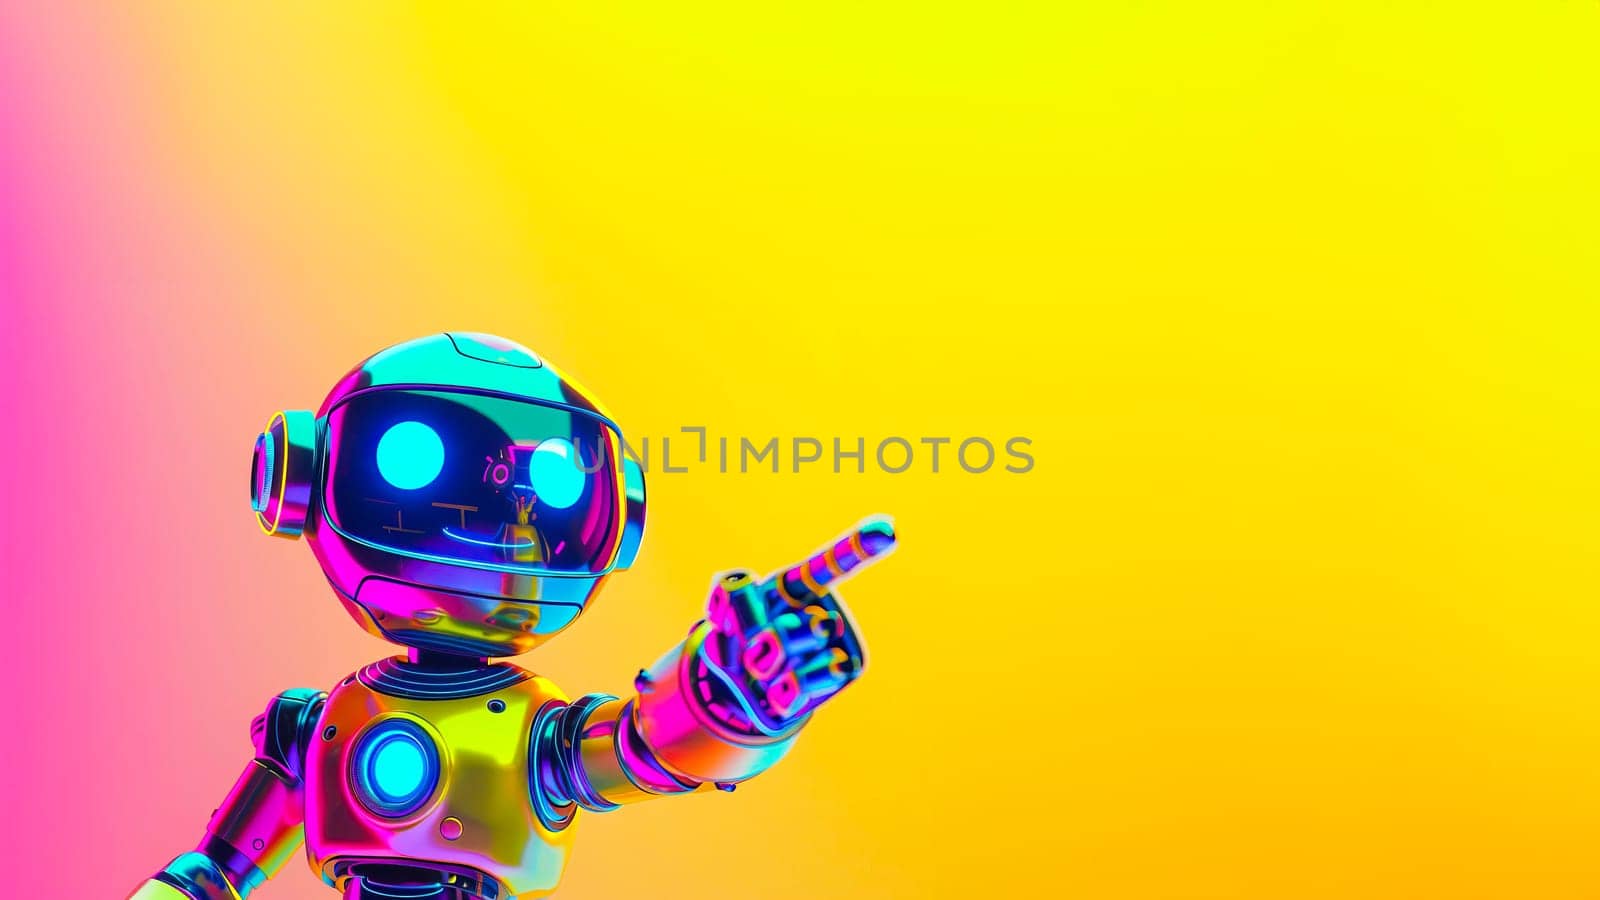 A cute, positive robot pointing at something with a bright yellow background.